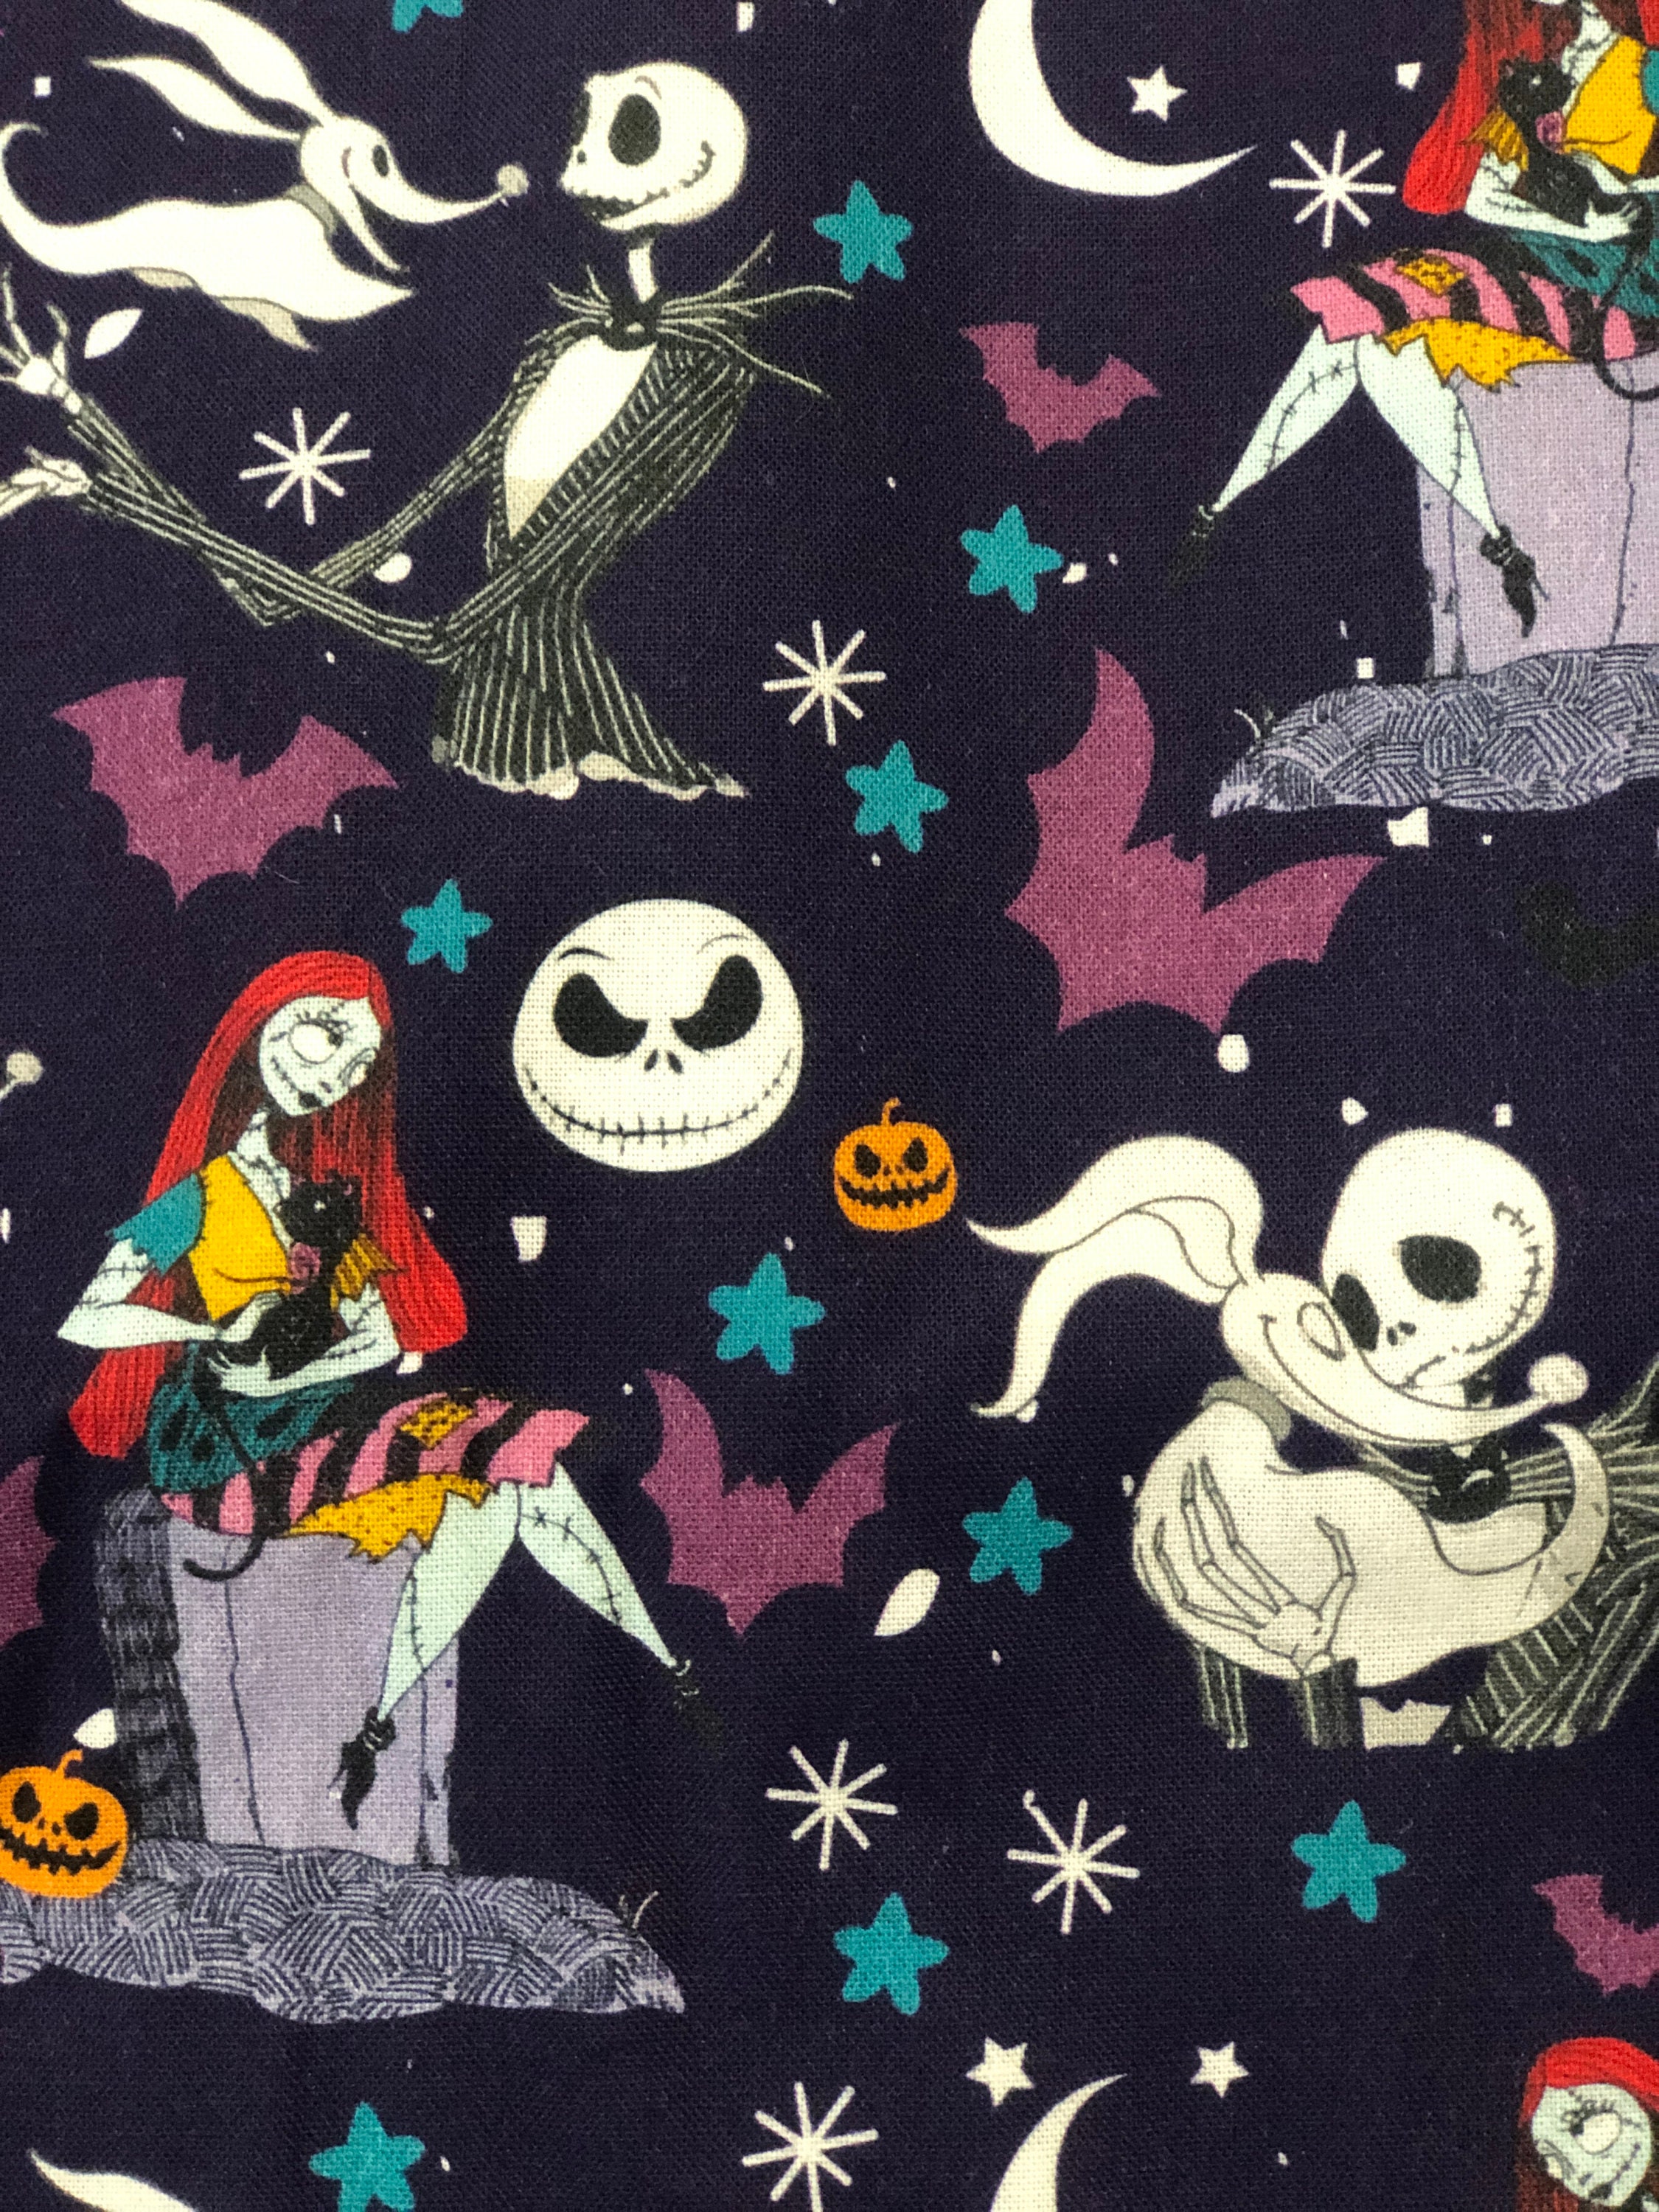 Nightmare Before Christmas 100% Cotton Fabric by the Yard | Etsy